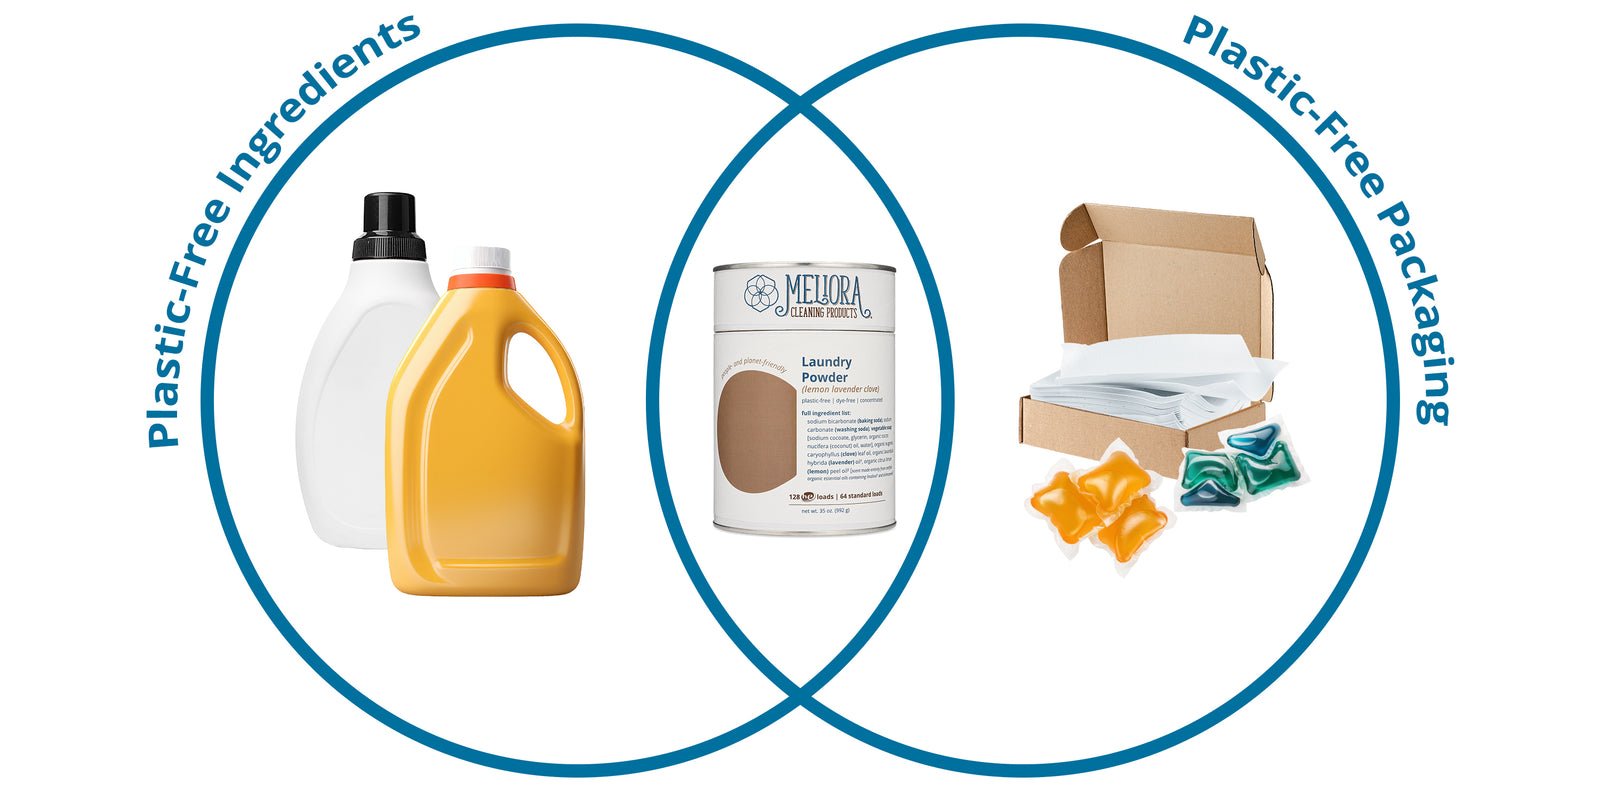 A venn diagram. One circle, plastic-free ingredients, contains plastic laundry jugs. The other, plastic-free packaging, contains detergent pods and sheets. The overlapping section contains Meliora laundry powder.